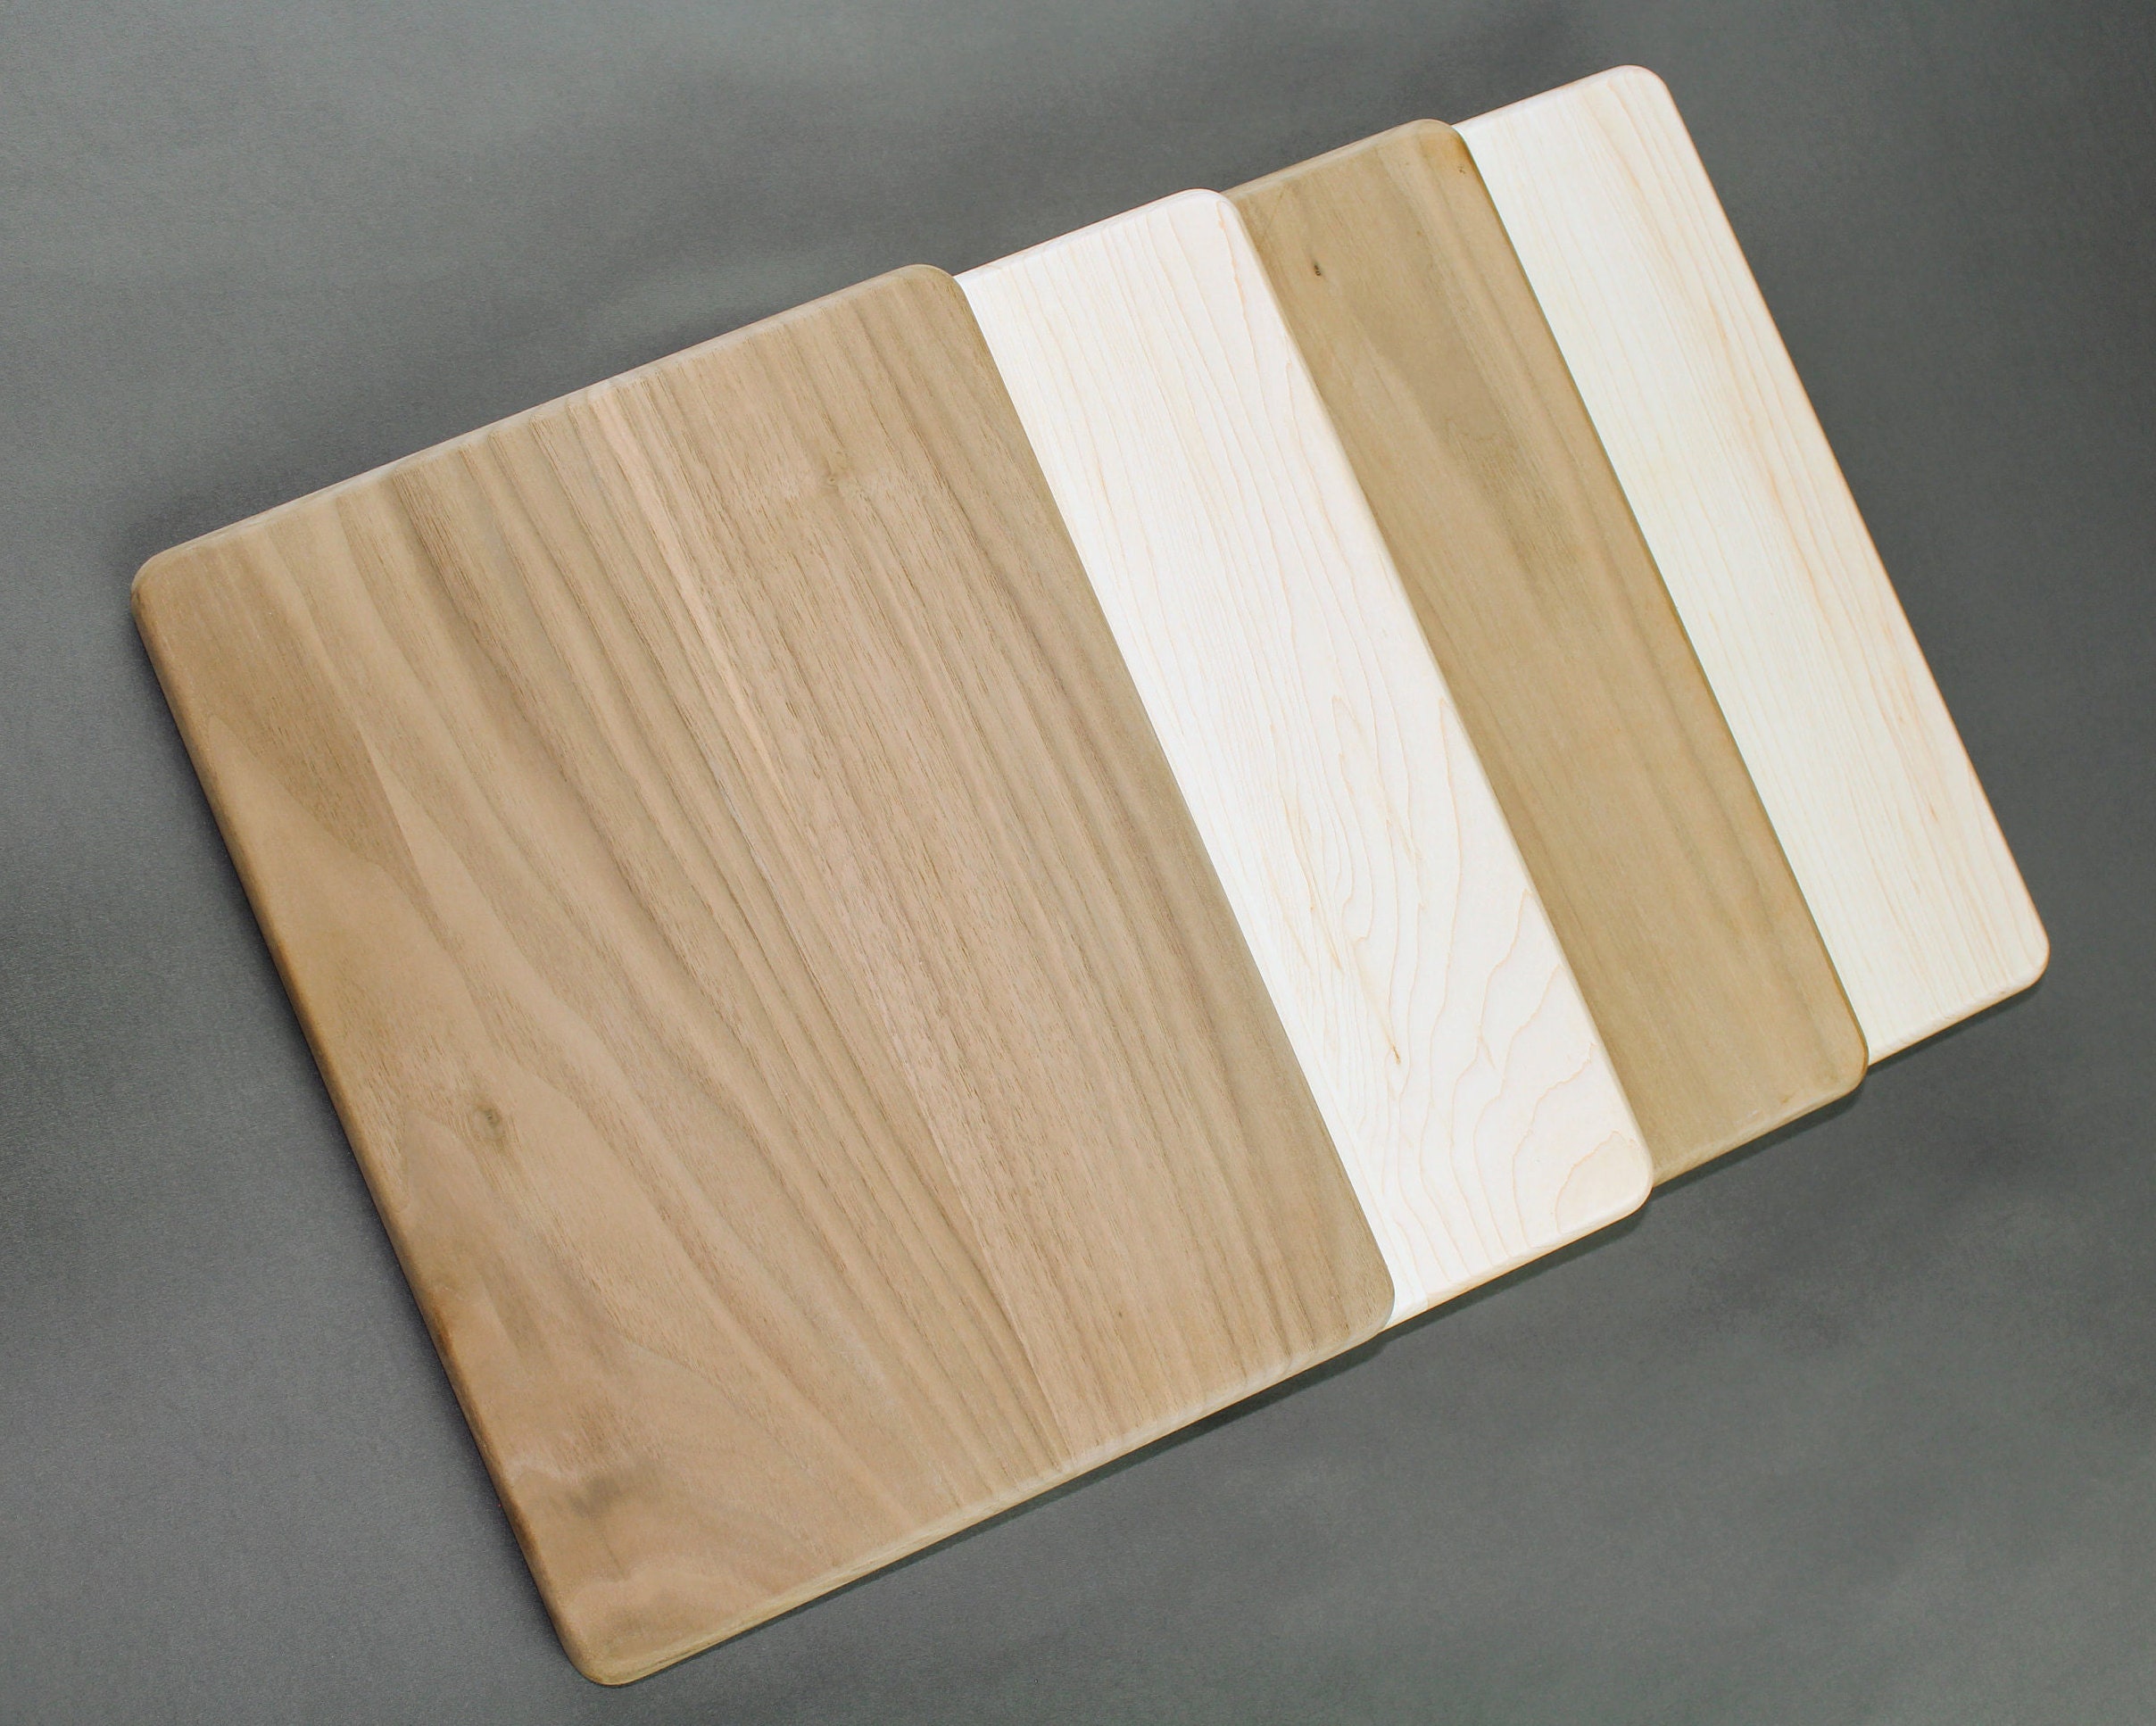 Walnut and hard maple side edge cutting board - Design and Craft